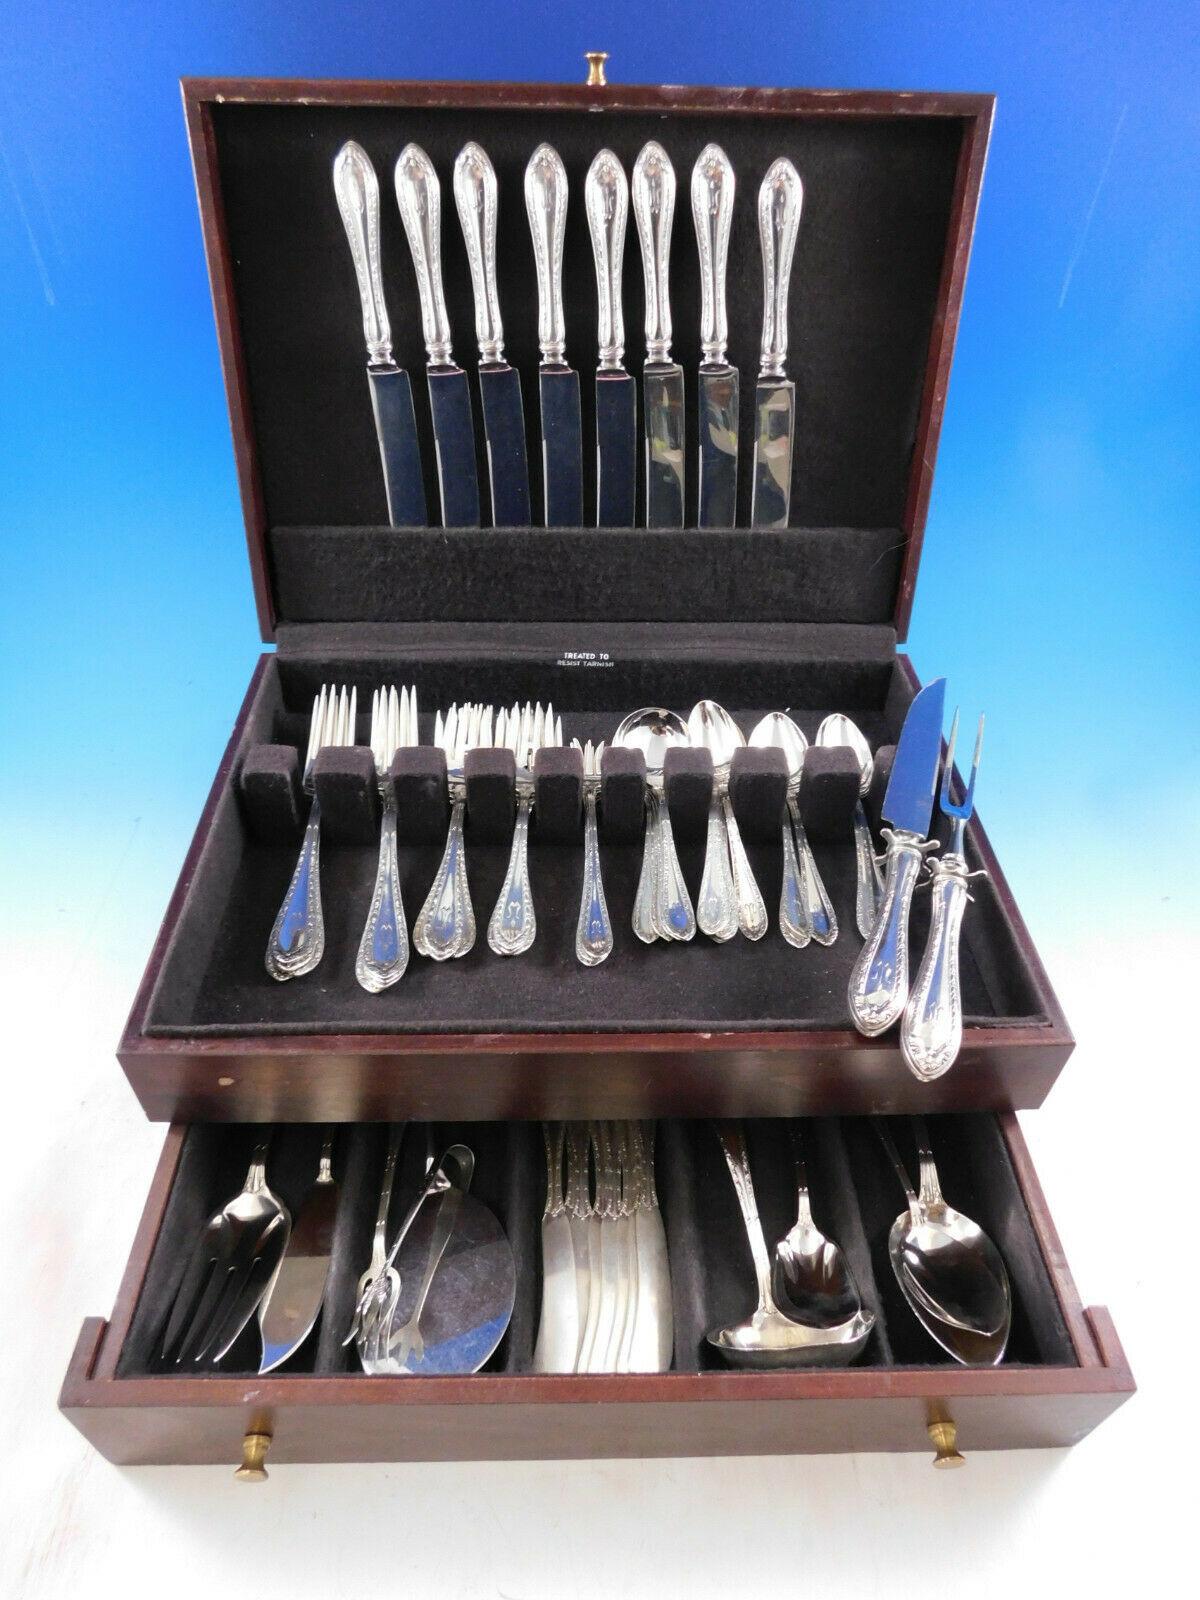 Louis XVI by Dominick and Haff (c1925) flatware set, 71 pieces. This scarce set includes:

8 Knives, 9 1/4